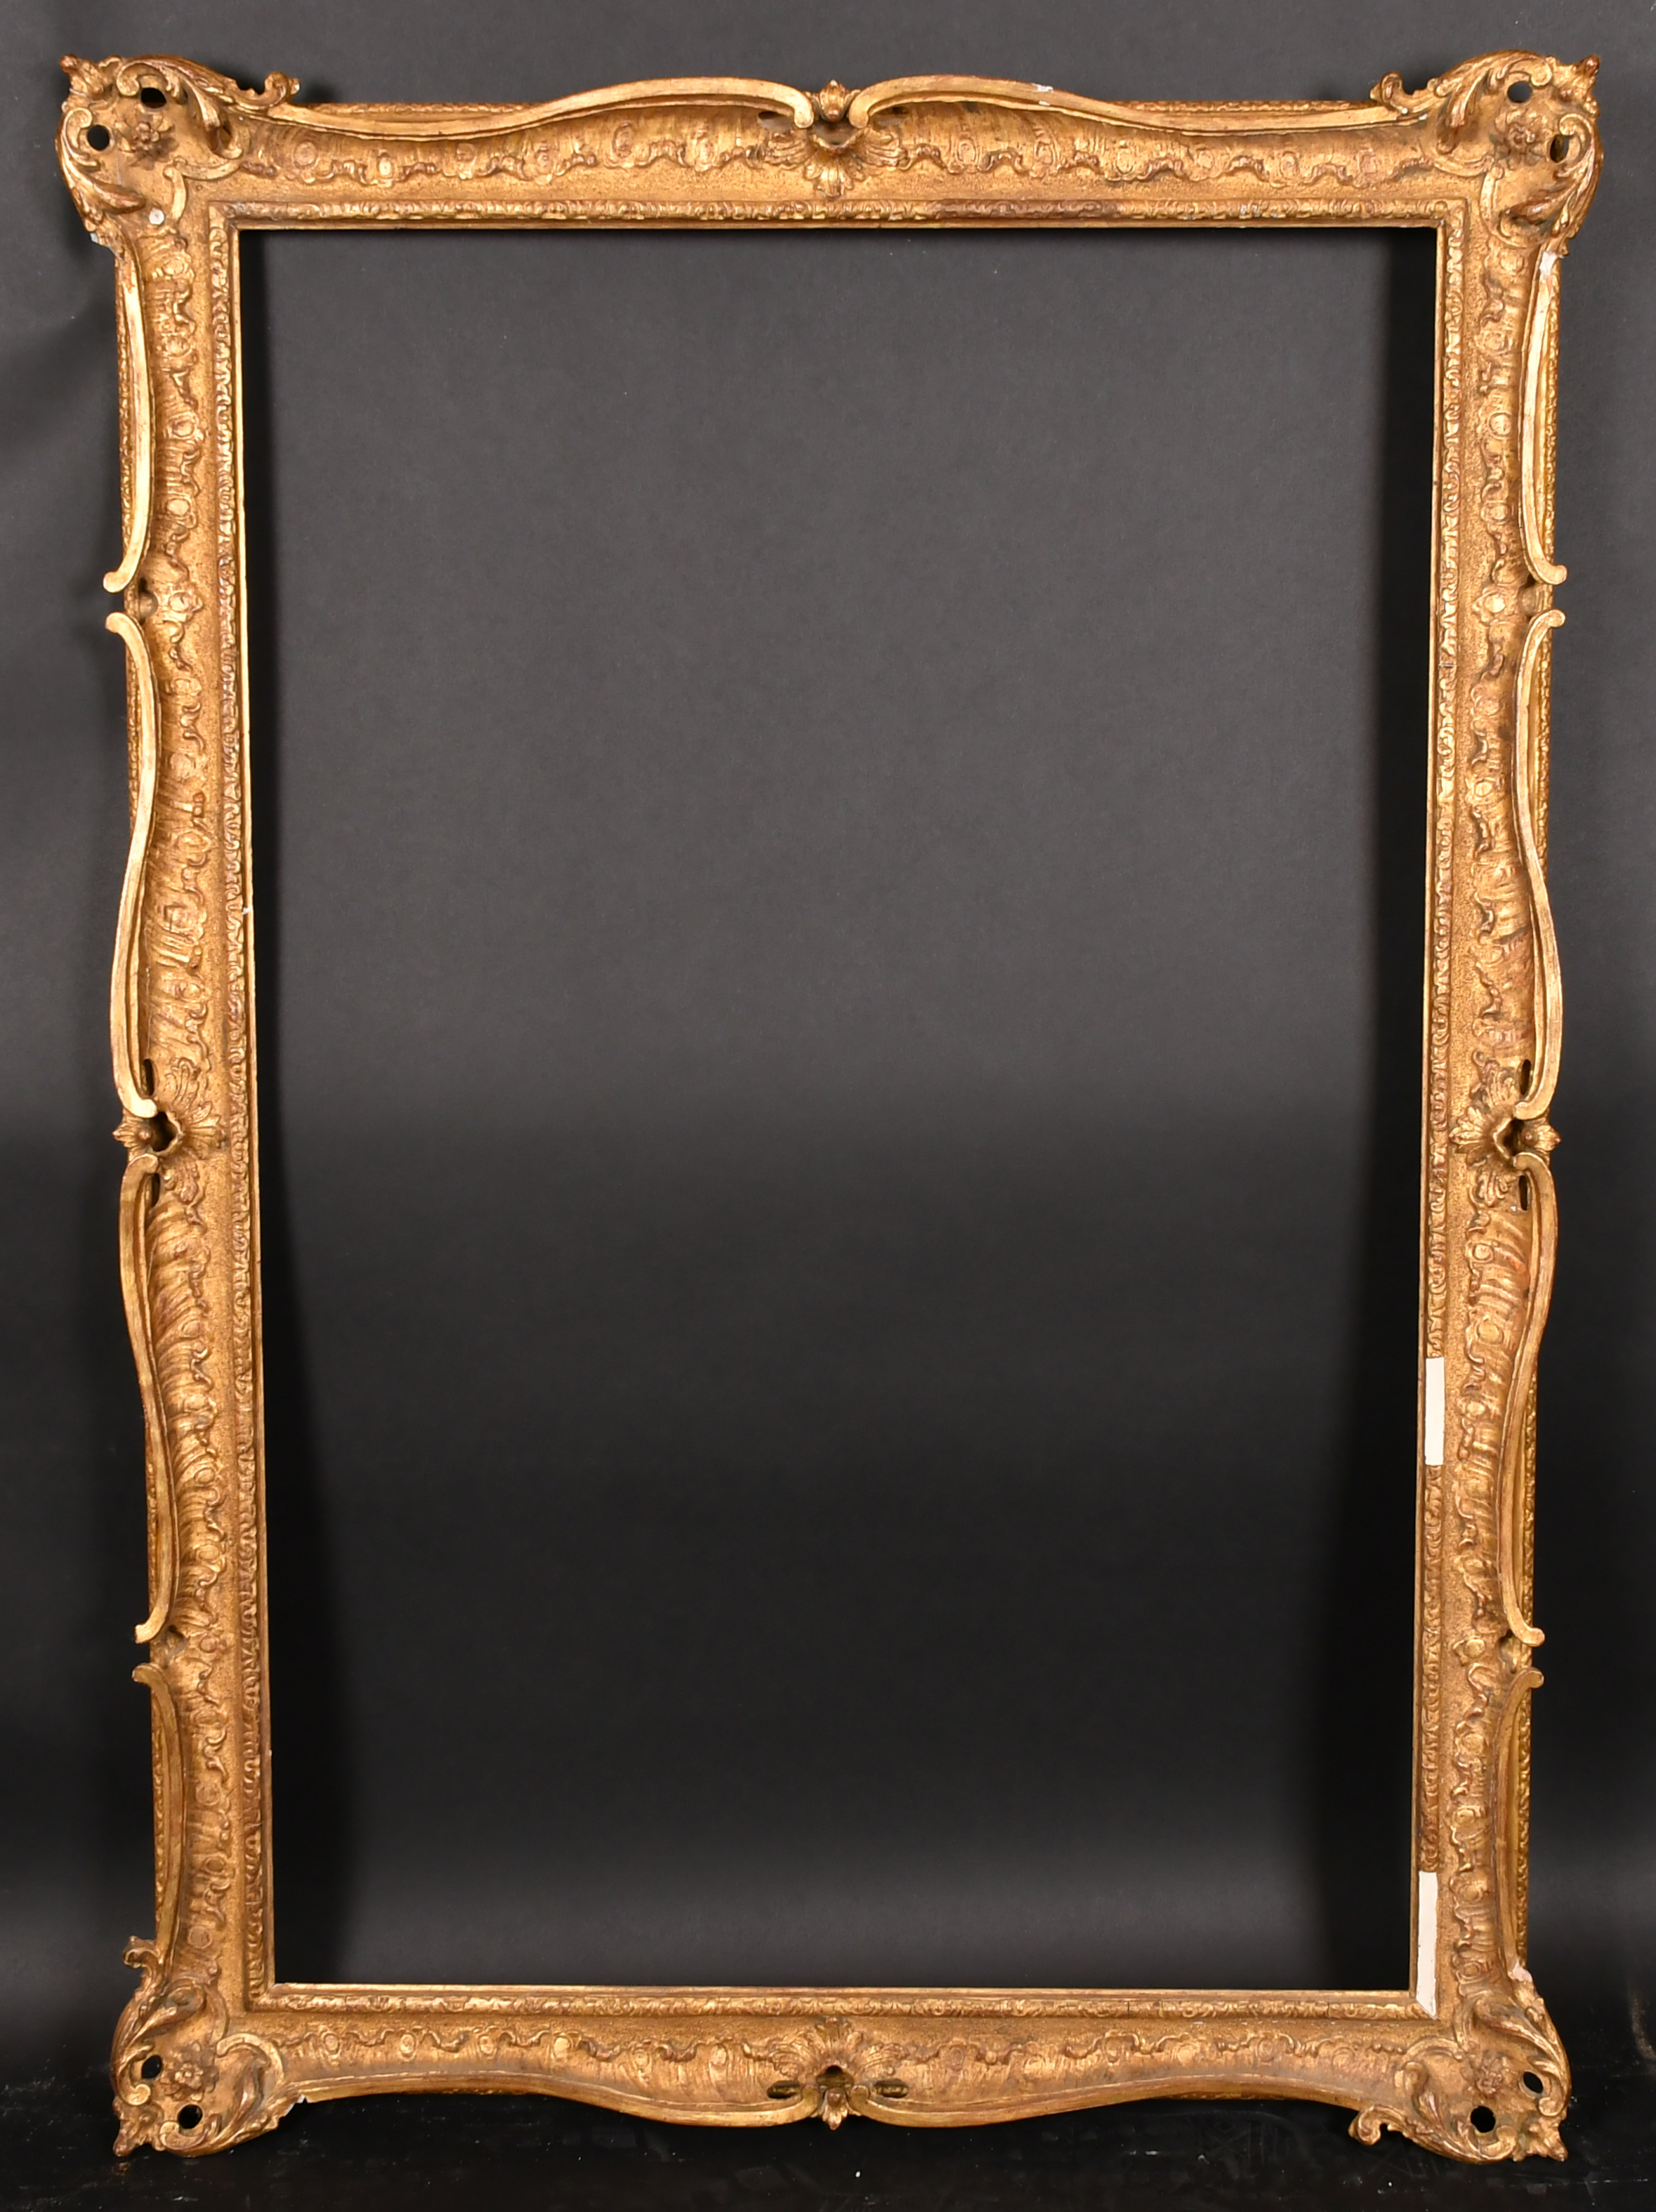 20th Century English School. A Gilt Composition Frame, with swept and pierced centres and corners, - Image 2 of 3